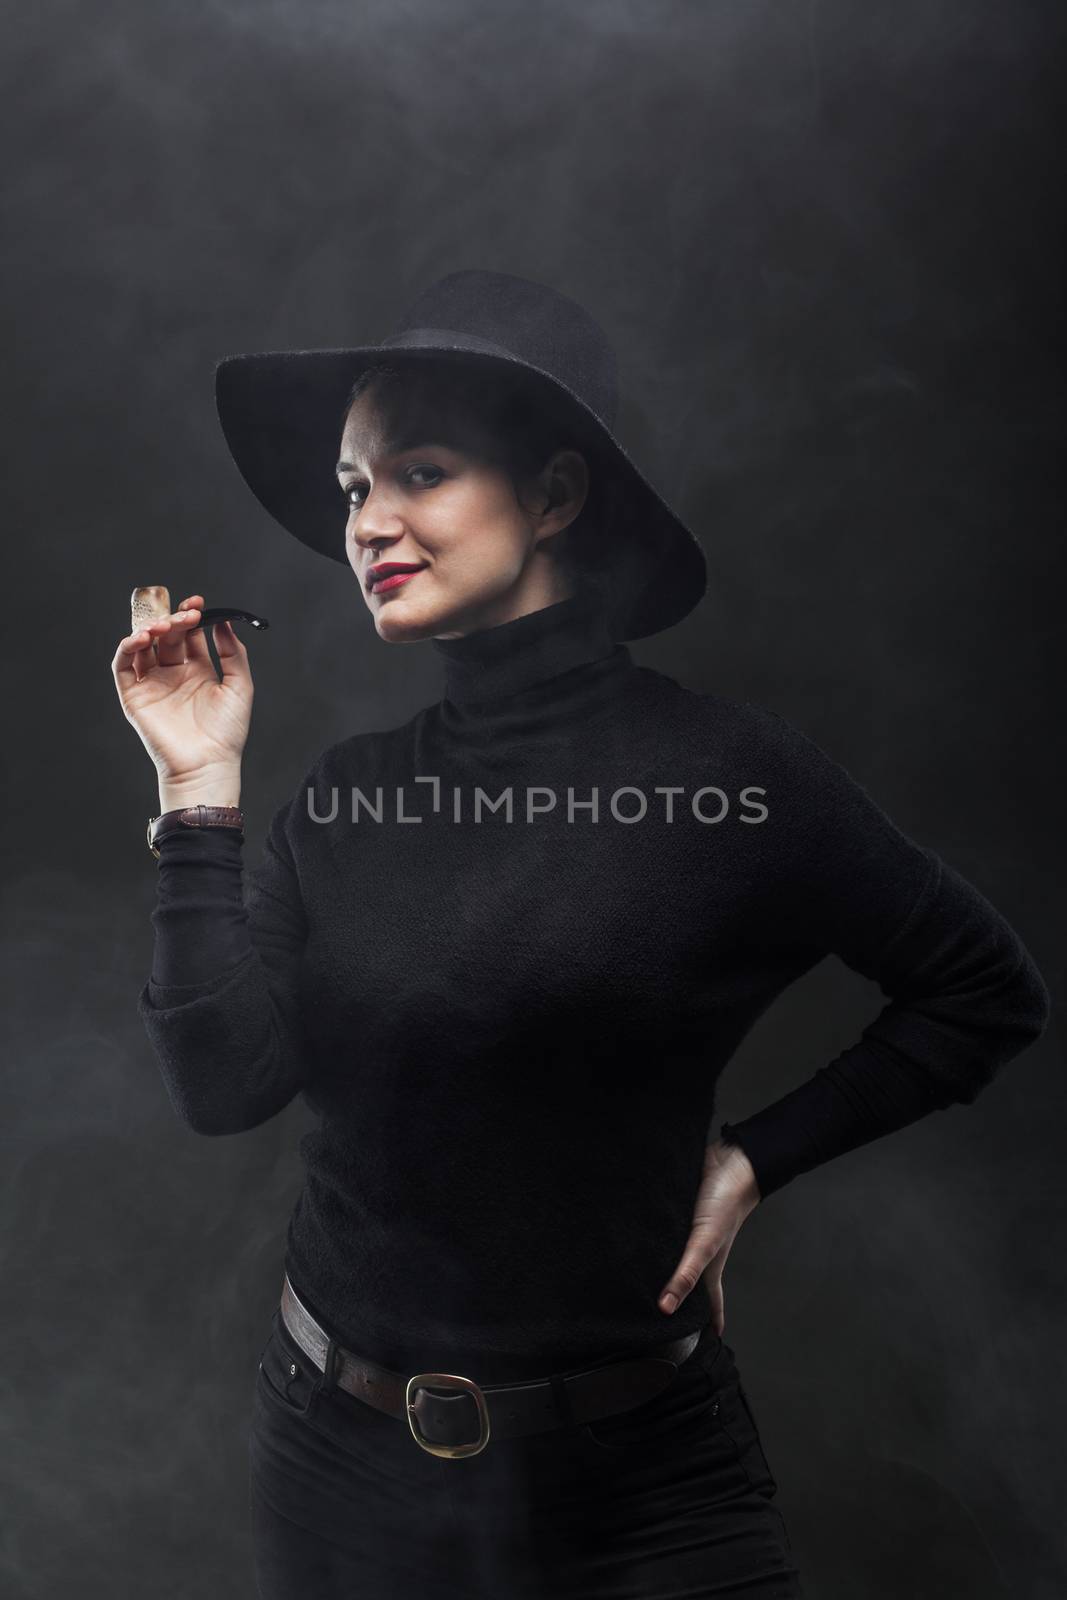 girl in black holding a pipe on smoke background